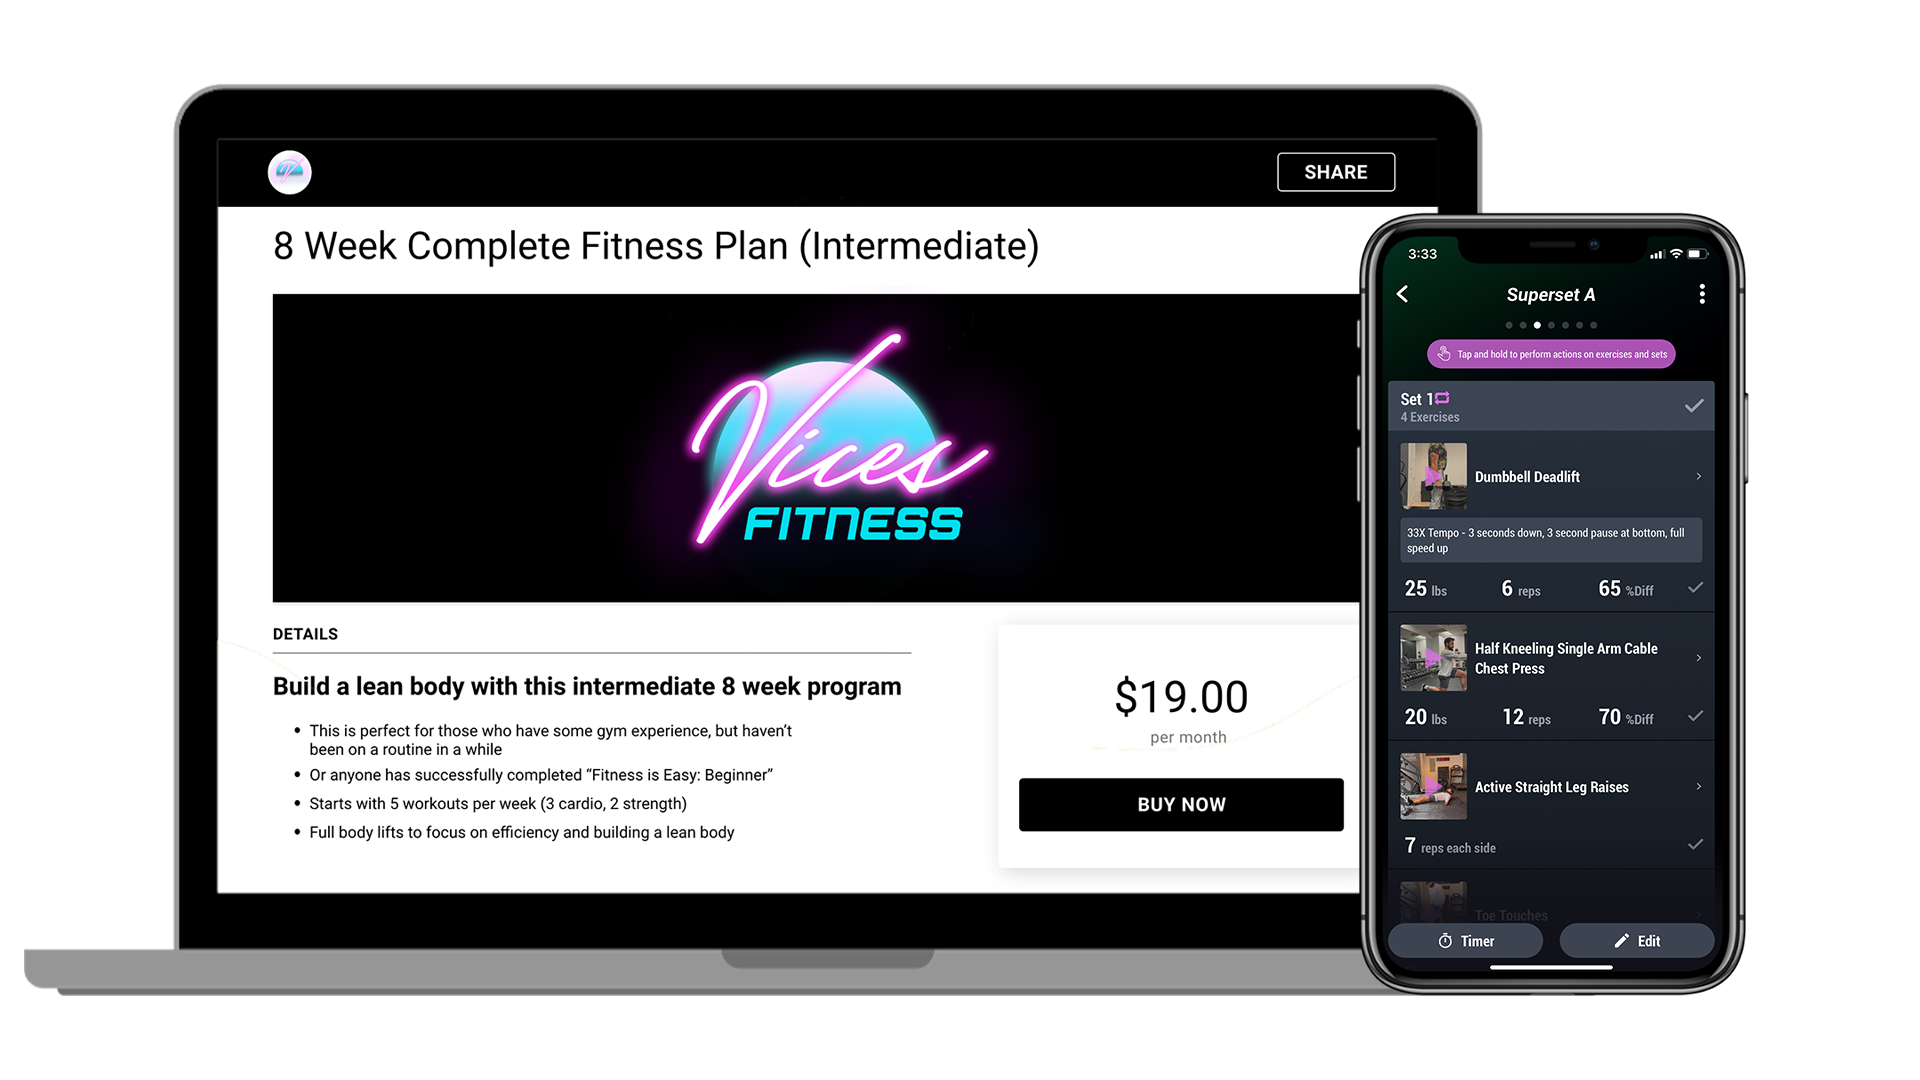 Vices Fitness devices